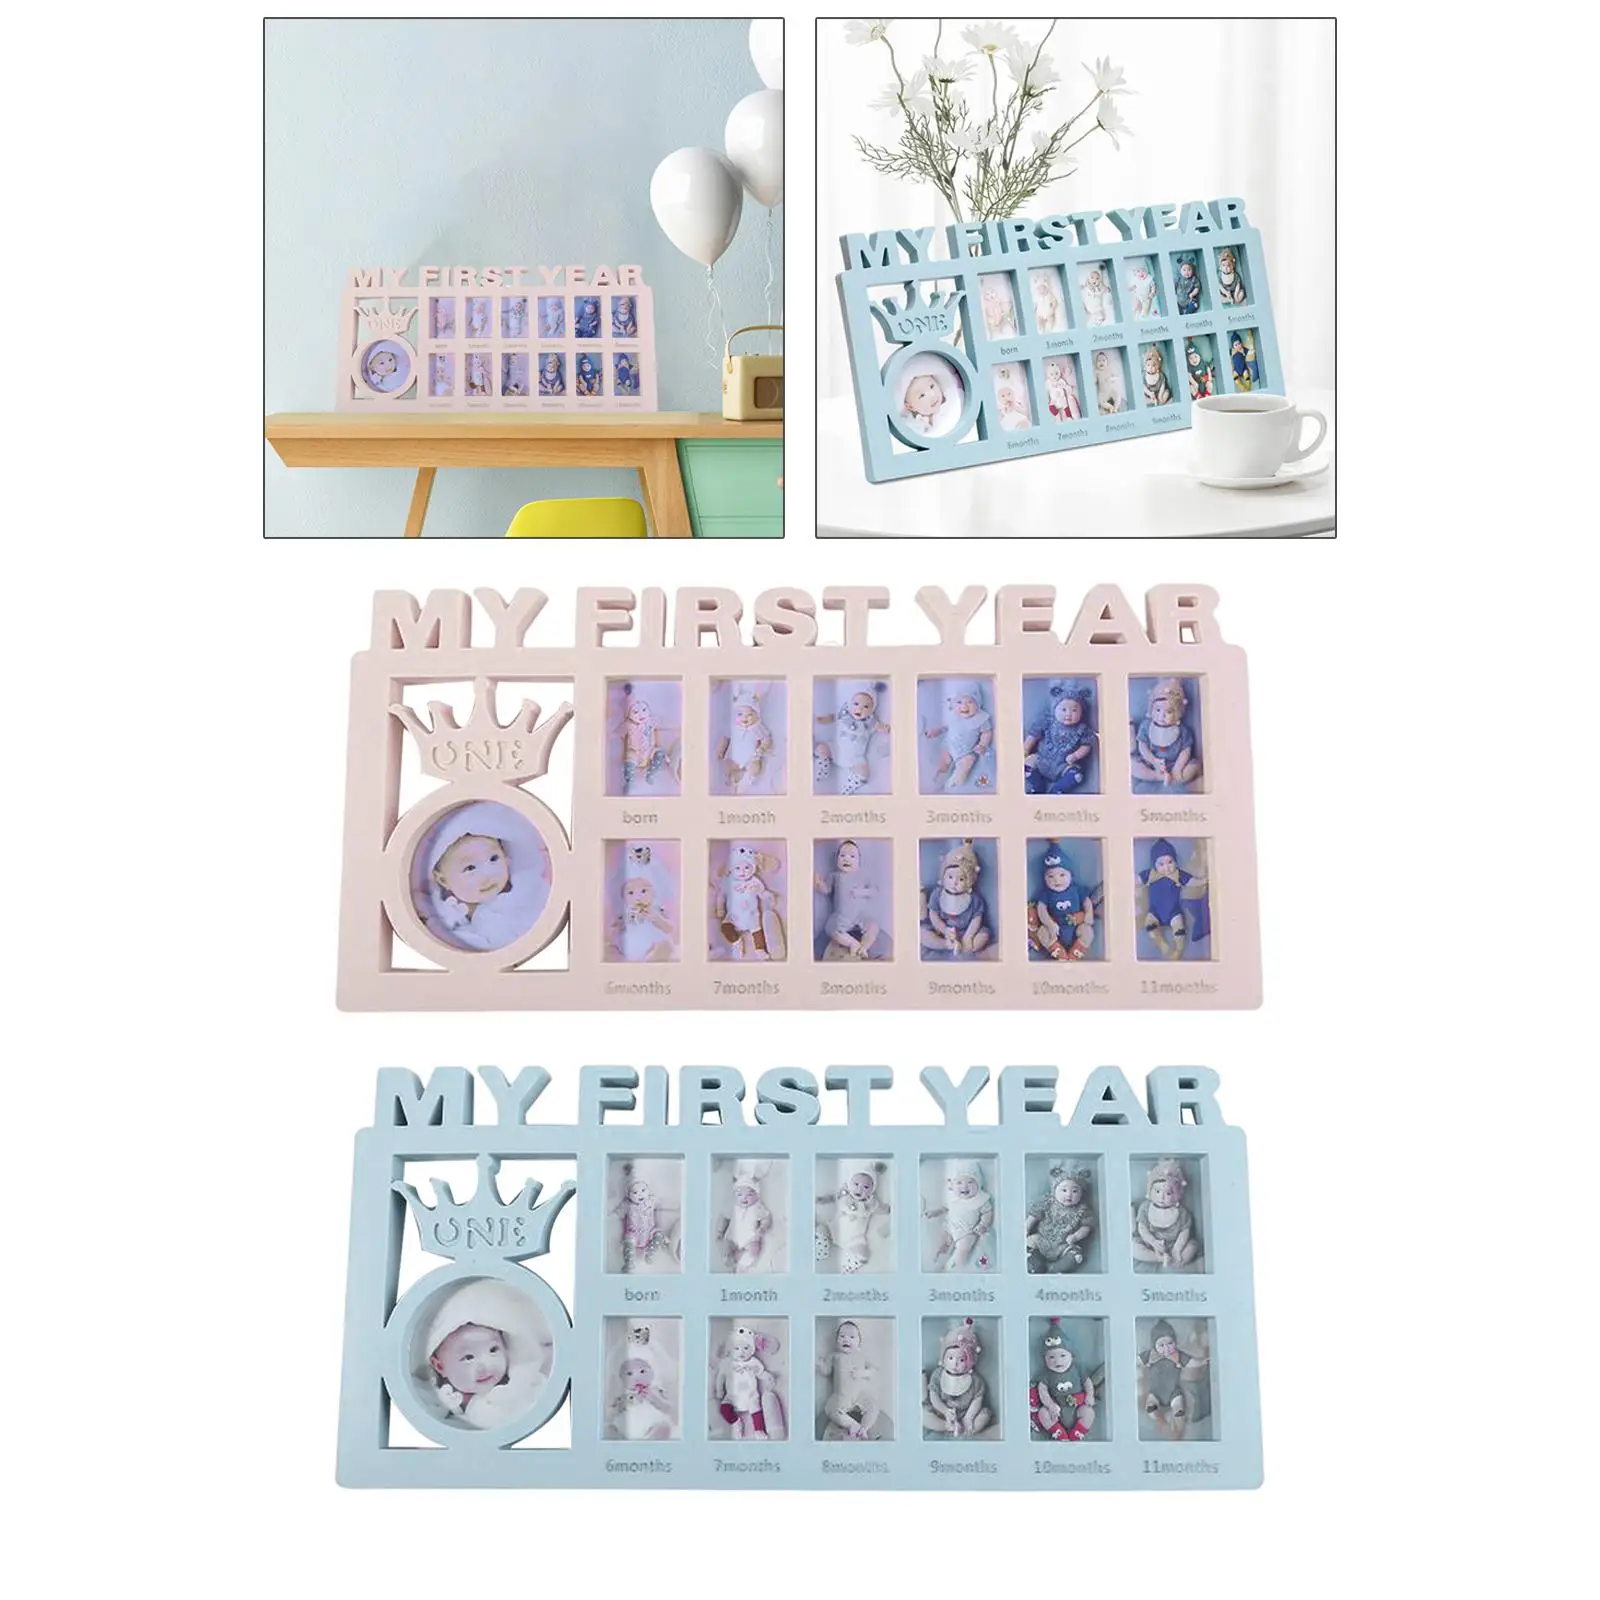 My First Year Baby Keepsake Frame 0-12 Months Pictures Photo Frame Souvenirs Kids Growing Memory 1st Birthday Gift